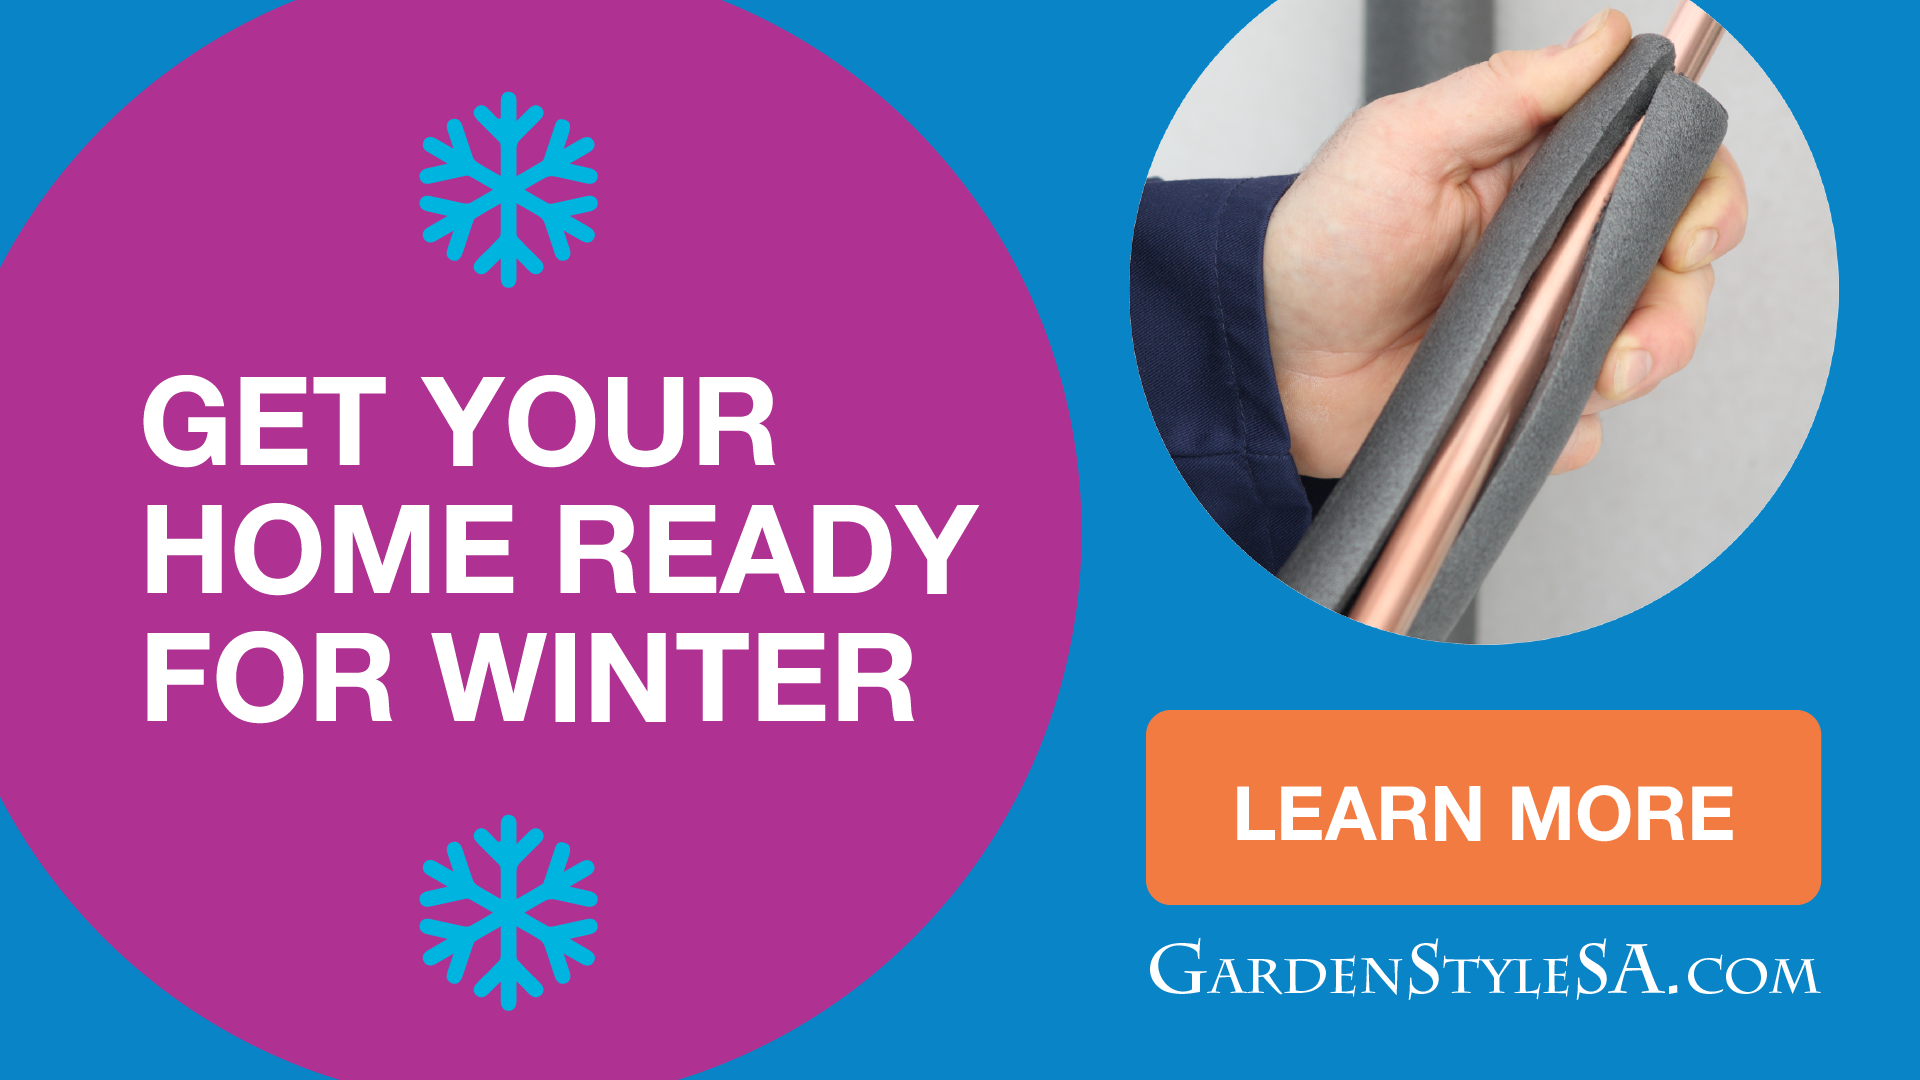 Be Ready Rebate: Winterize your pipes with a plumber and get a $75 rebate from SAWS.